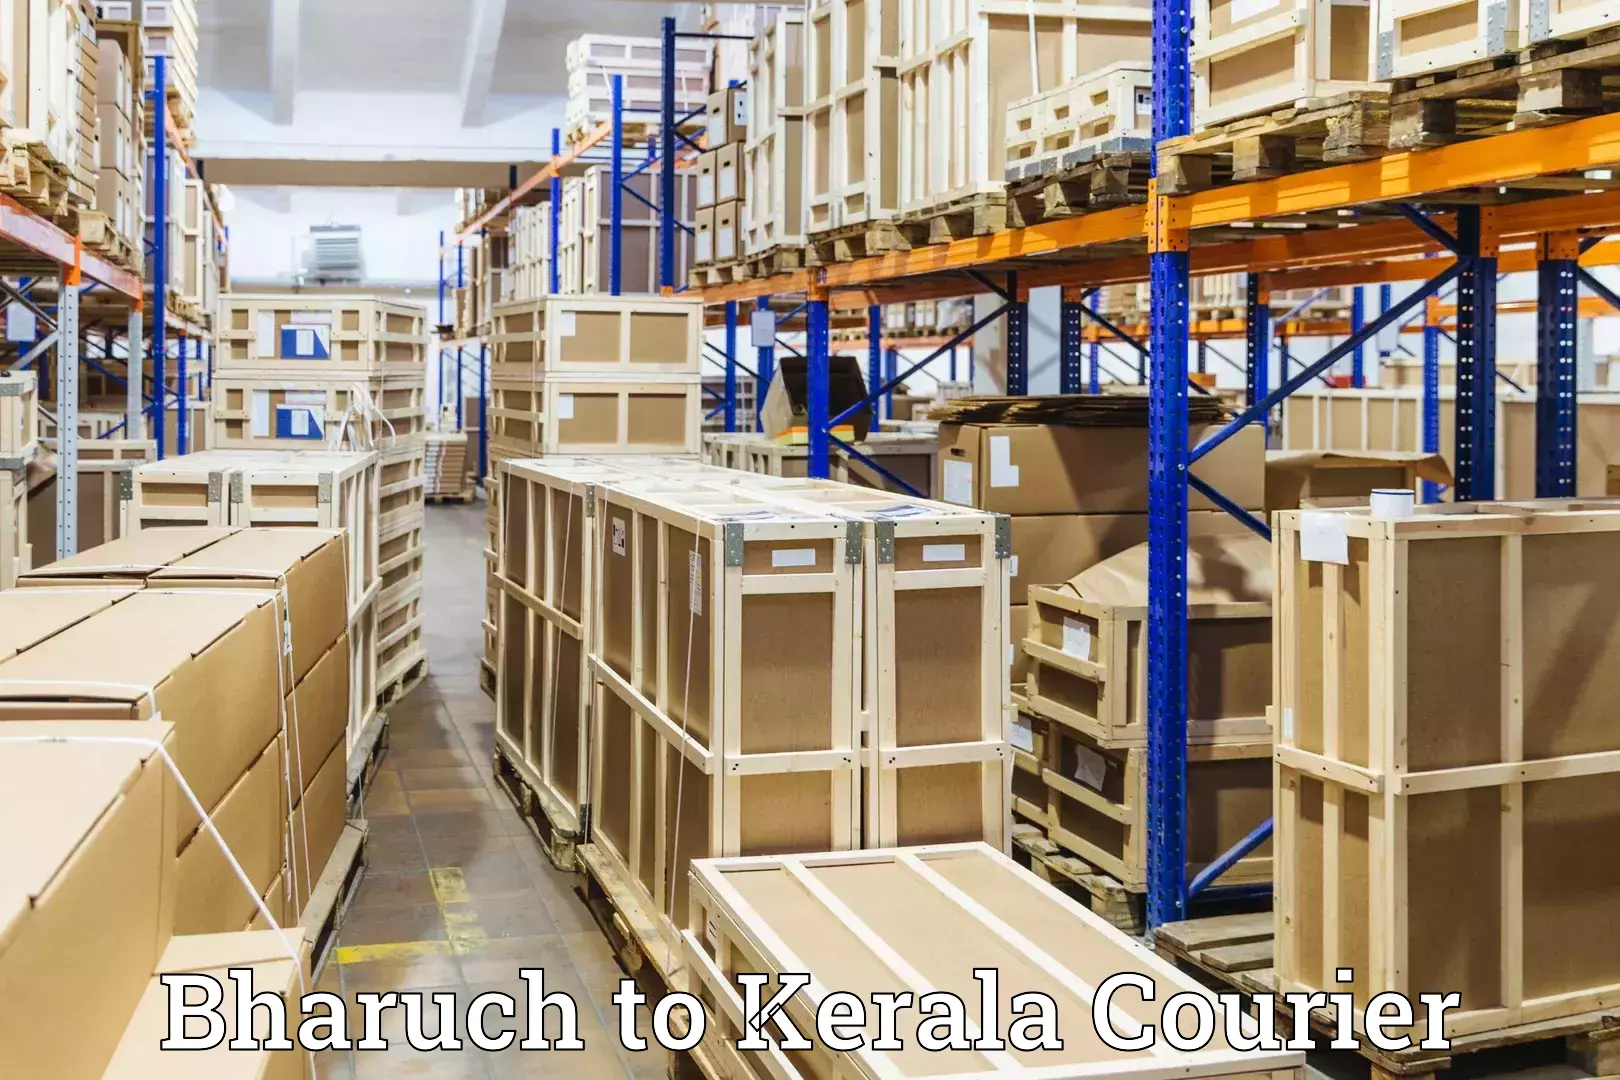 Same day luggage service in Bharuch to Kerala